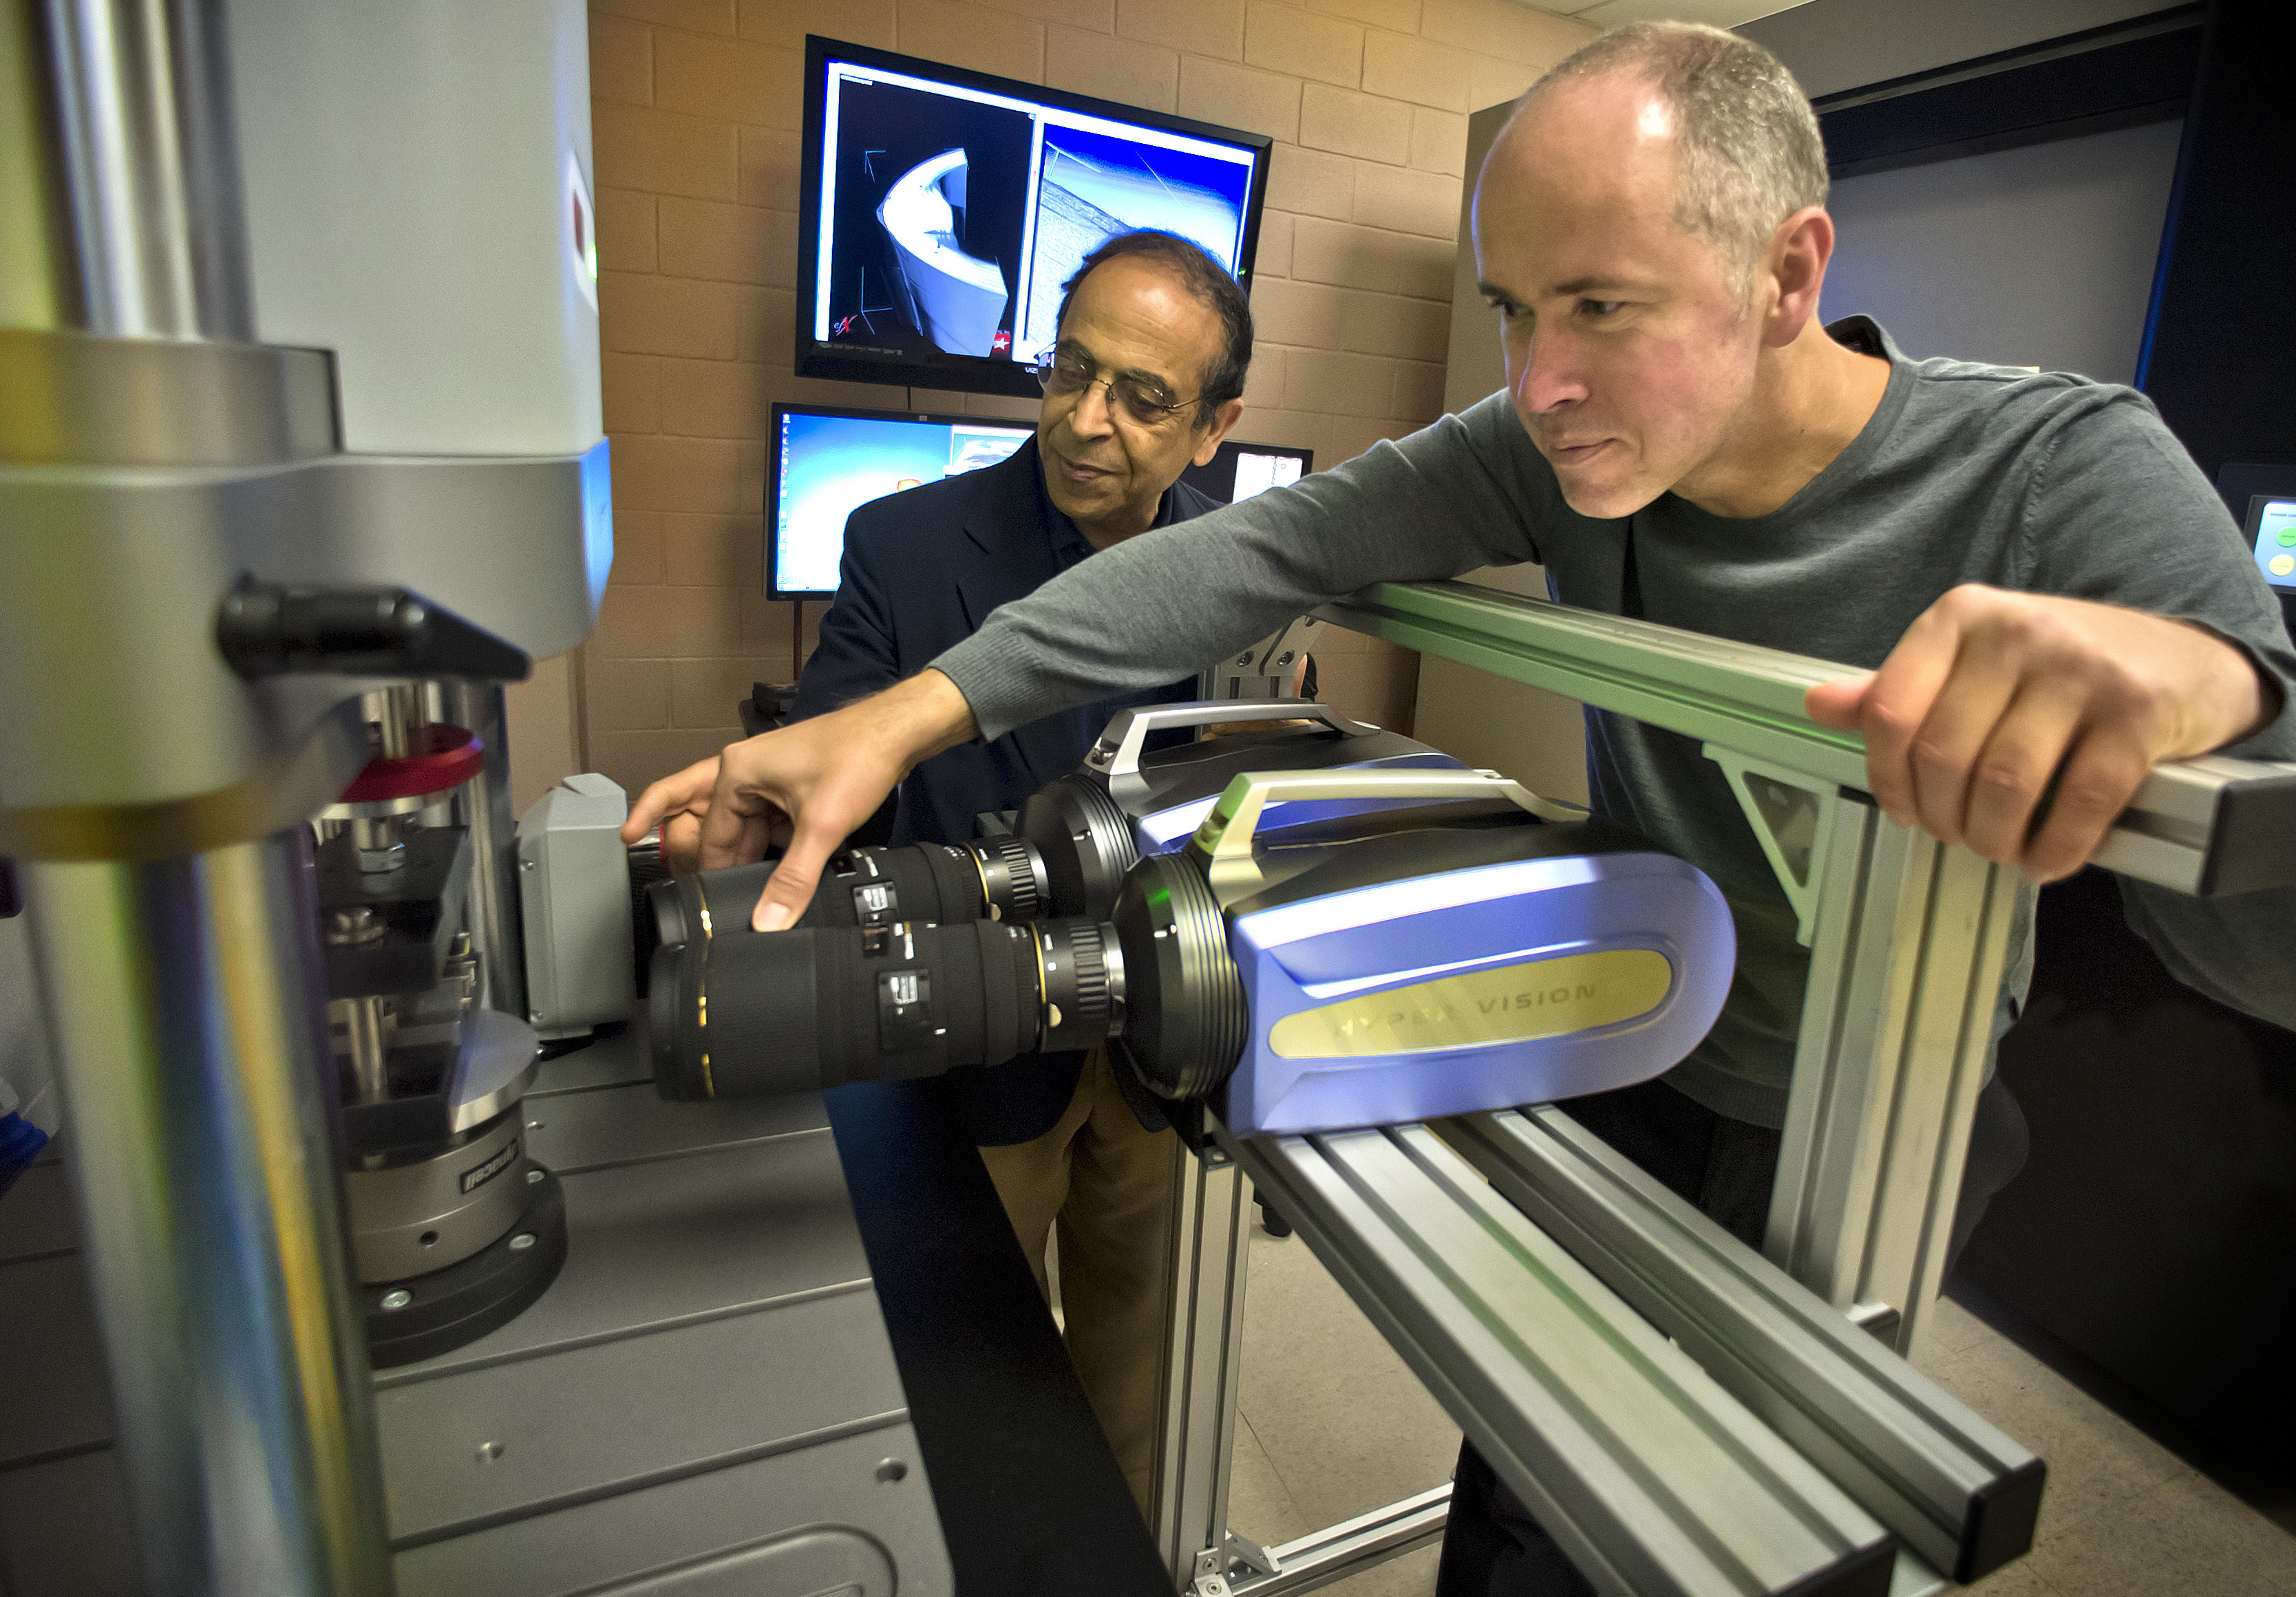 Andrew Makeev, right, professor in the mechanical and aerospace engineering department and director of the UT Arlington Advanced Materials and Structures Lab, looks over research results with Erian Armanios, chair of the mechanical and aerospace engineering department.